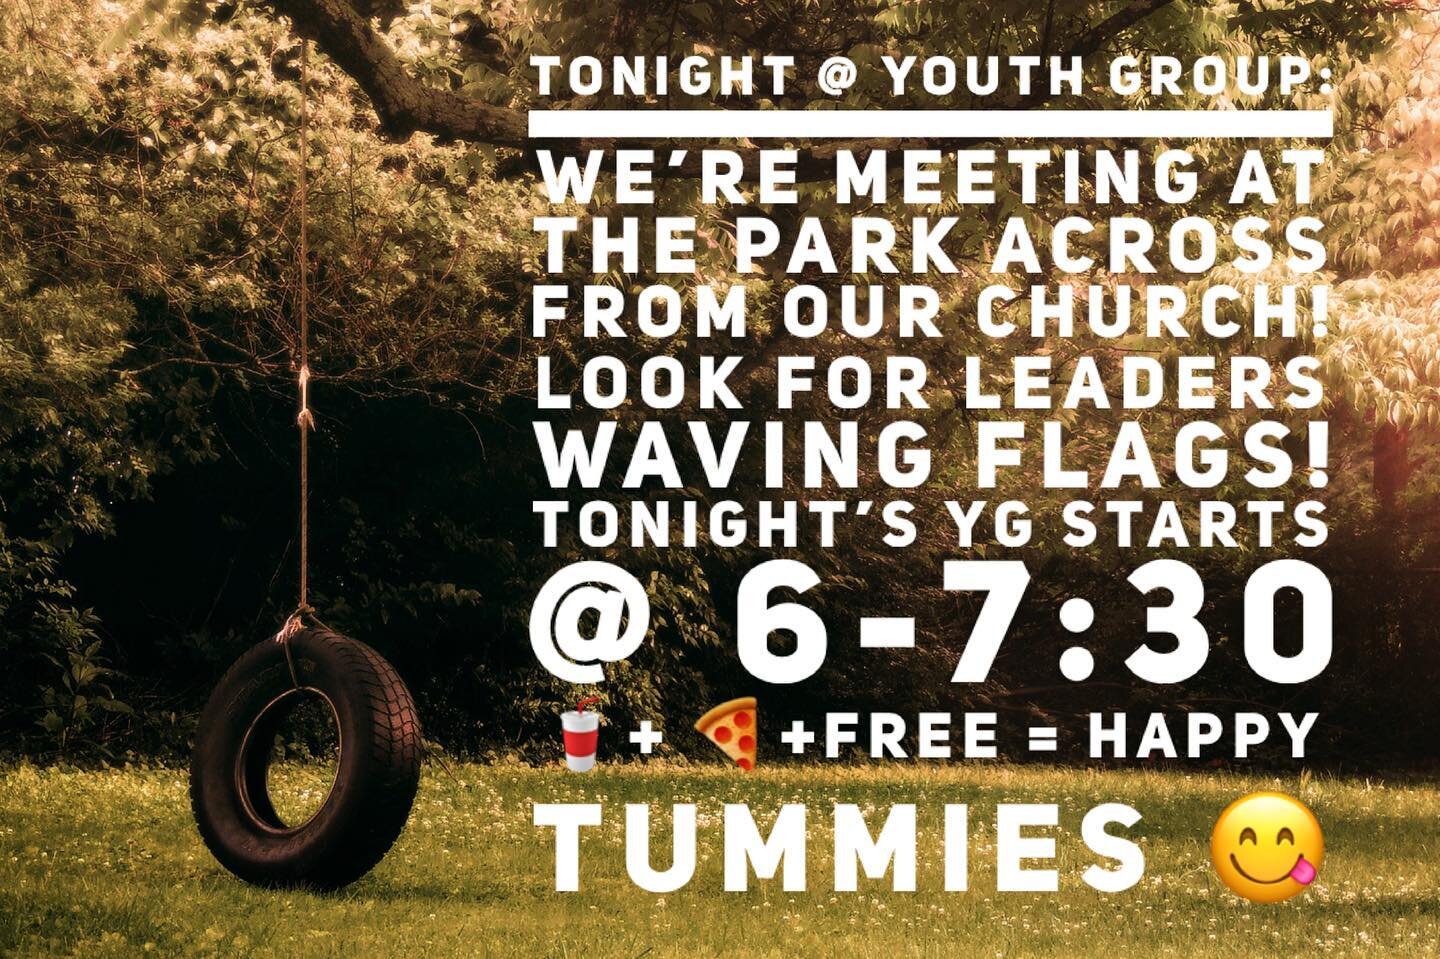 It&rsquo;s the last Monday for August 2022! Students, come meet us at the park across the from the church. Look for some of your youth leaders waving flags if you can&rsquo;t spot them. BRING YOU FRIENDS!!!! See a little later, my dudes. 😎🤘
~~~~~~
